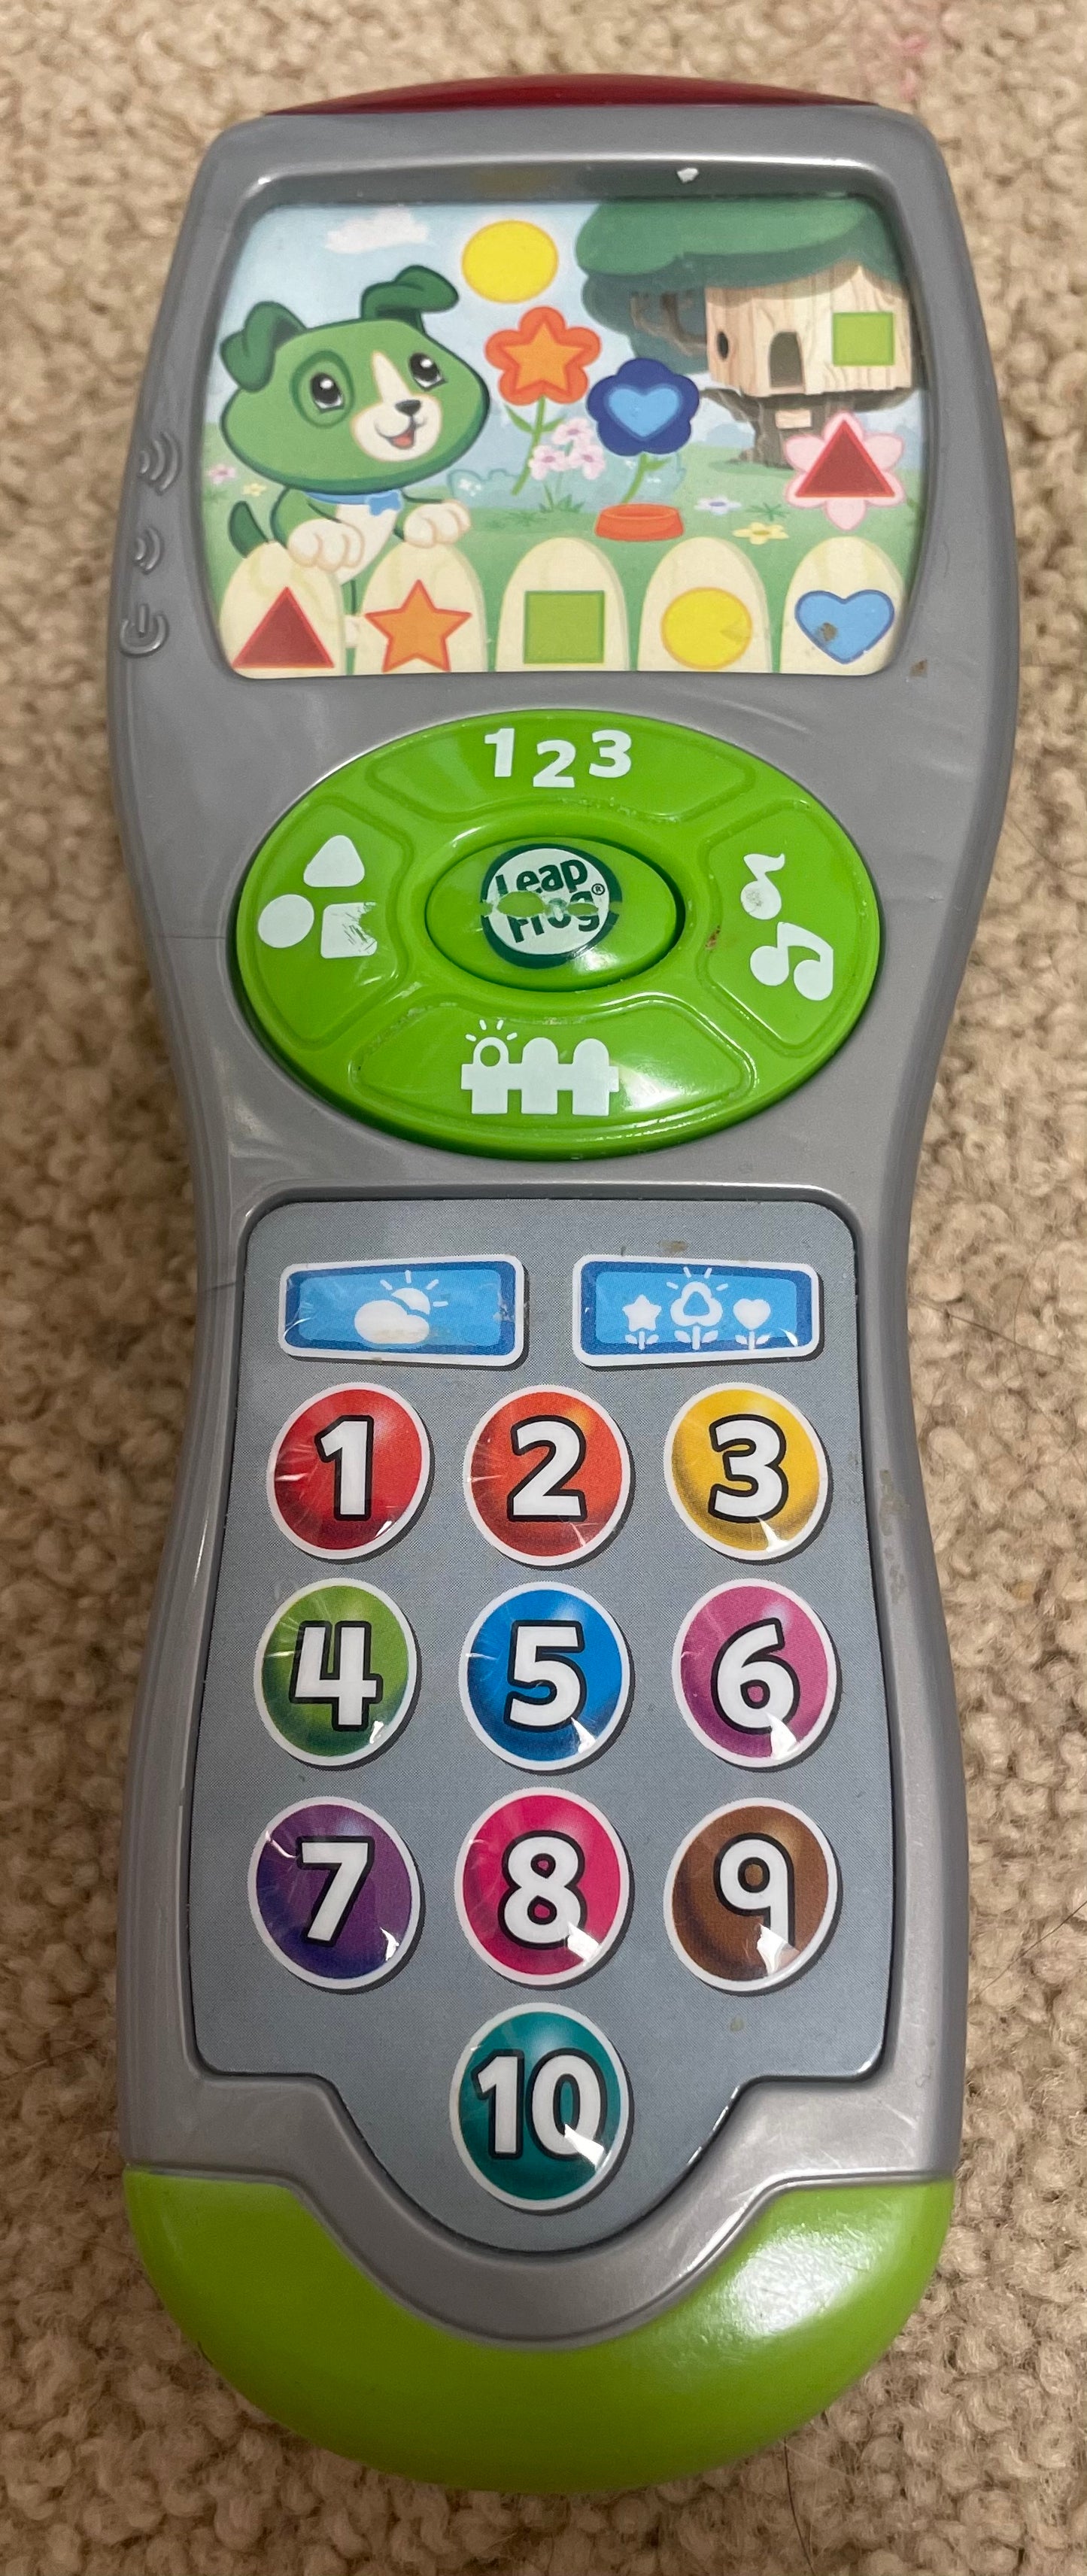 Leap frog phone toy